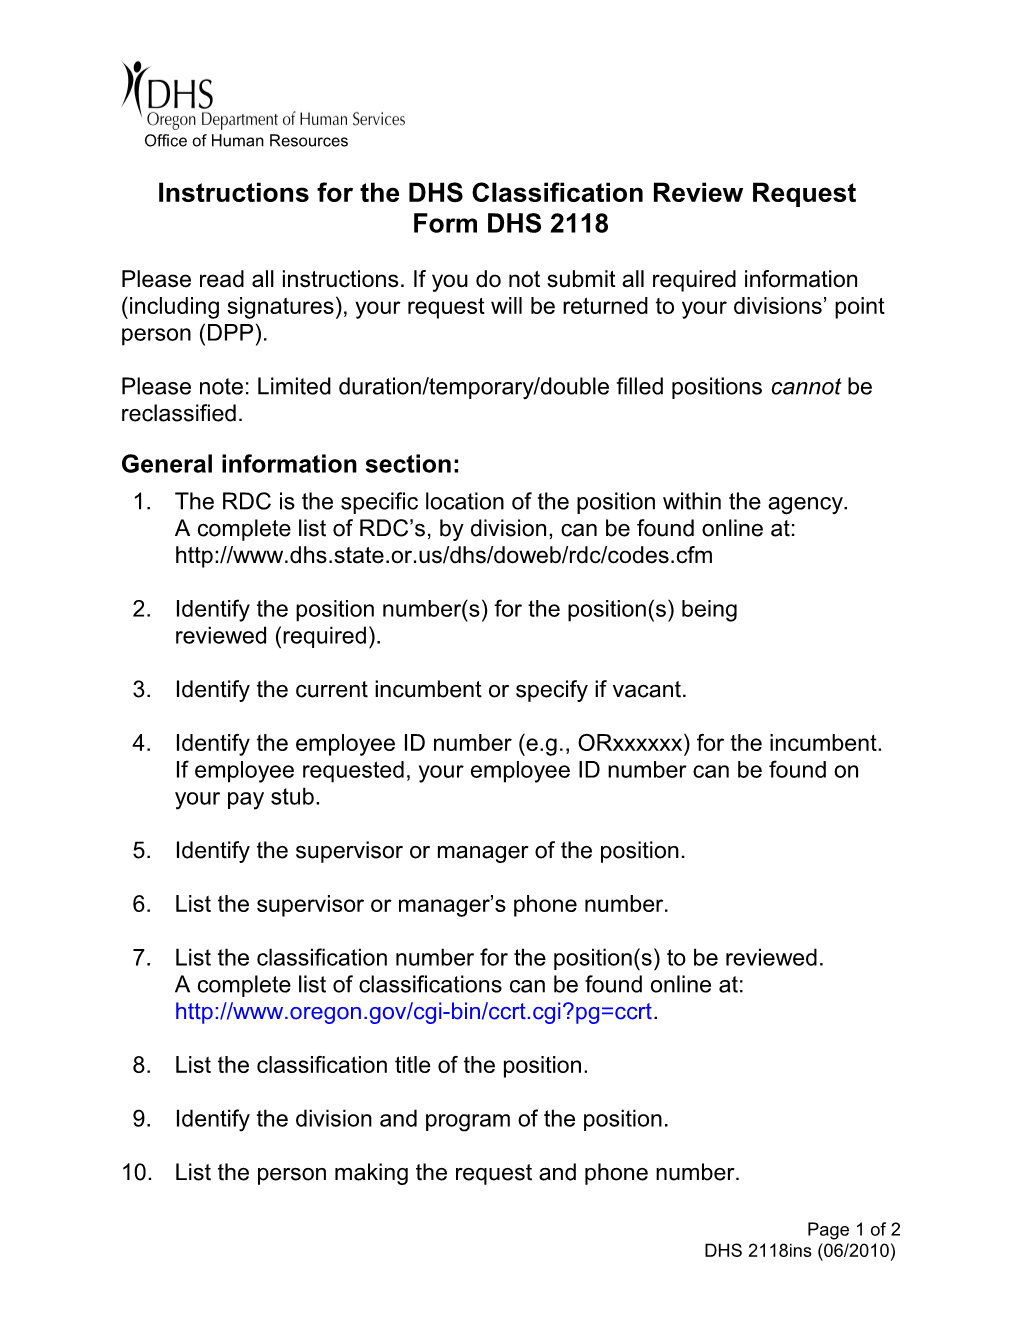 Instructions for the DHS Classification Review Request Form